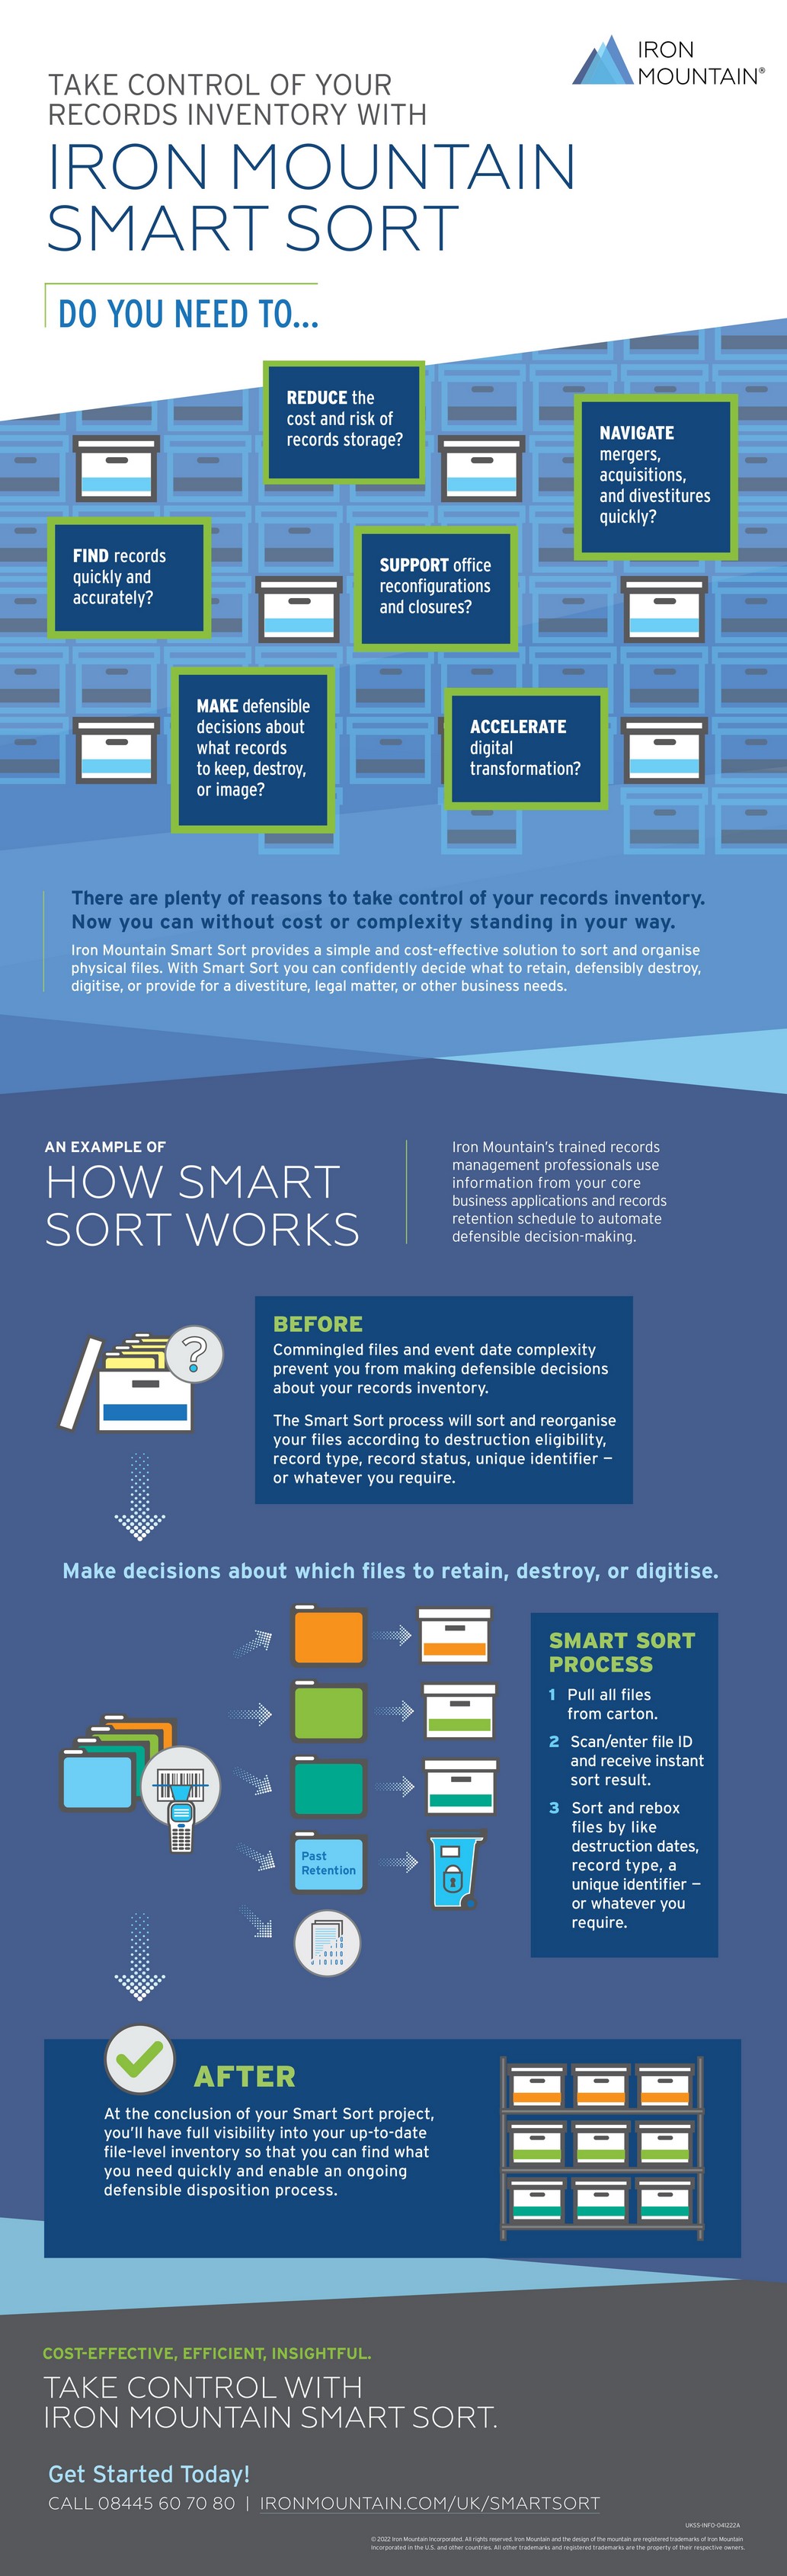 Take control of your records inventory with smart Iron Mountain Smart Sort Infographic